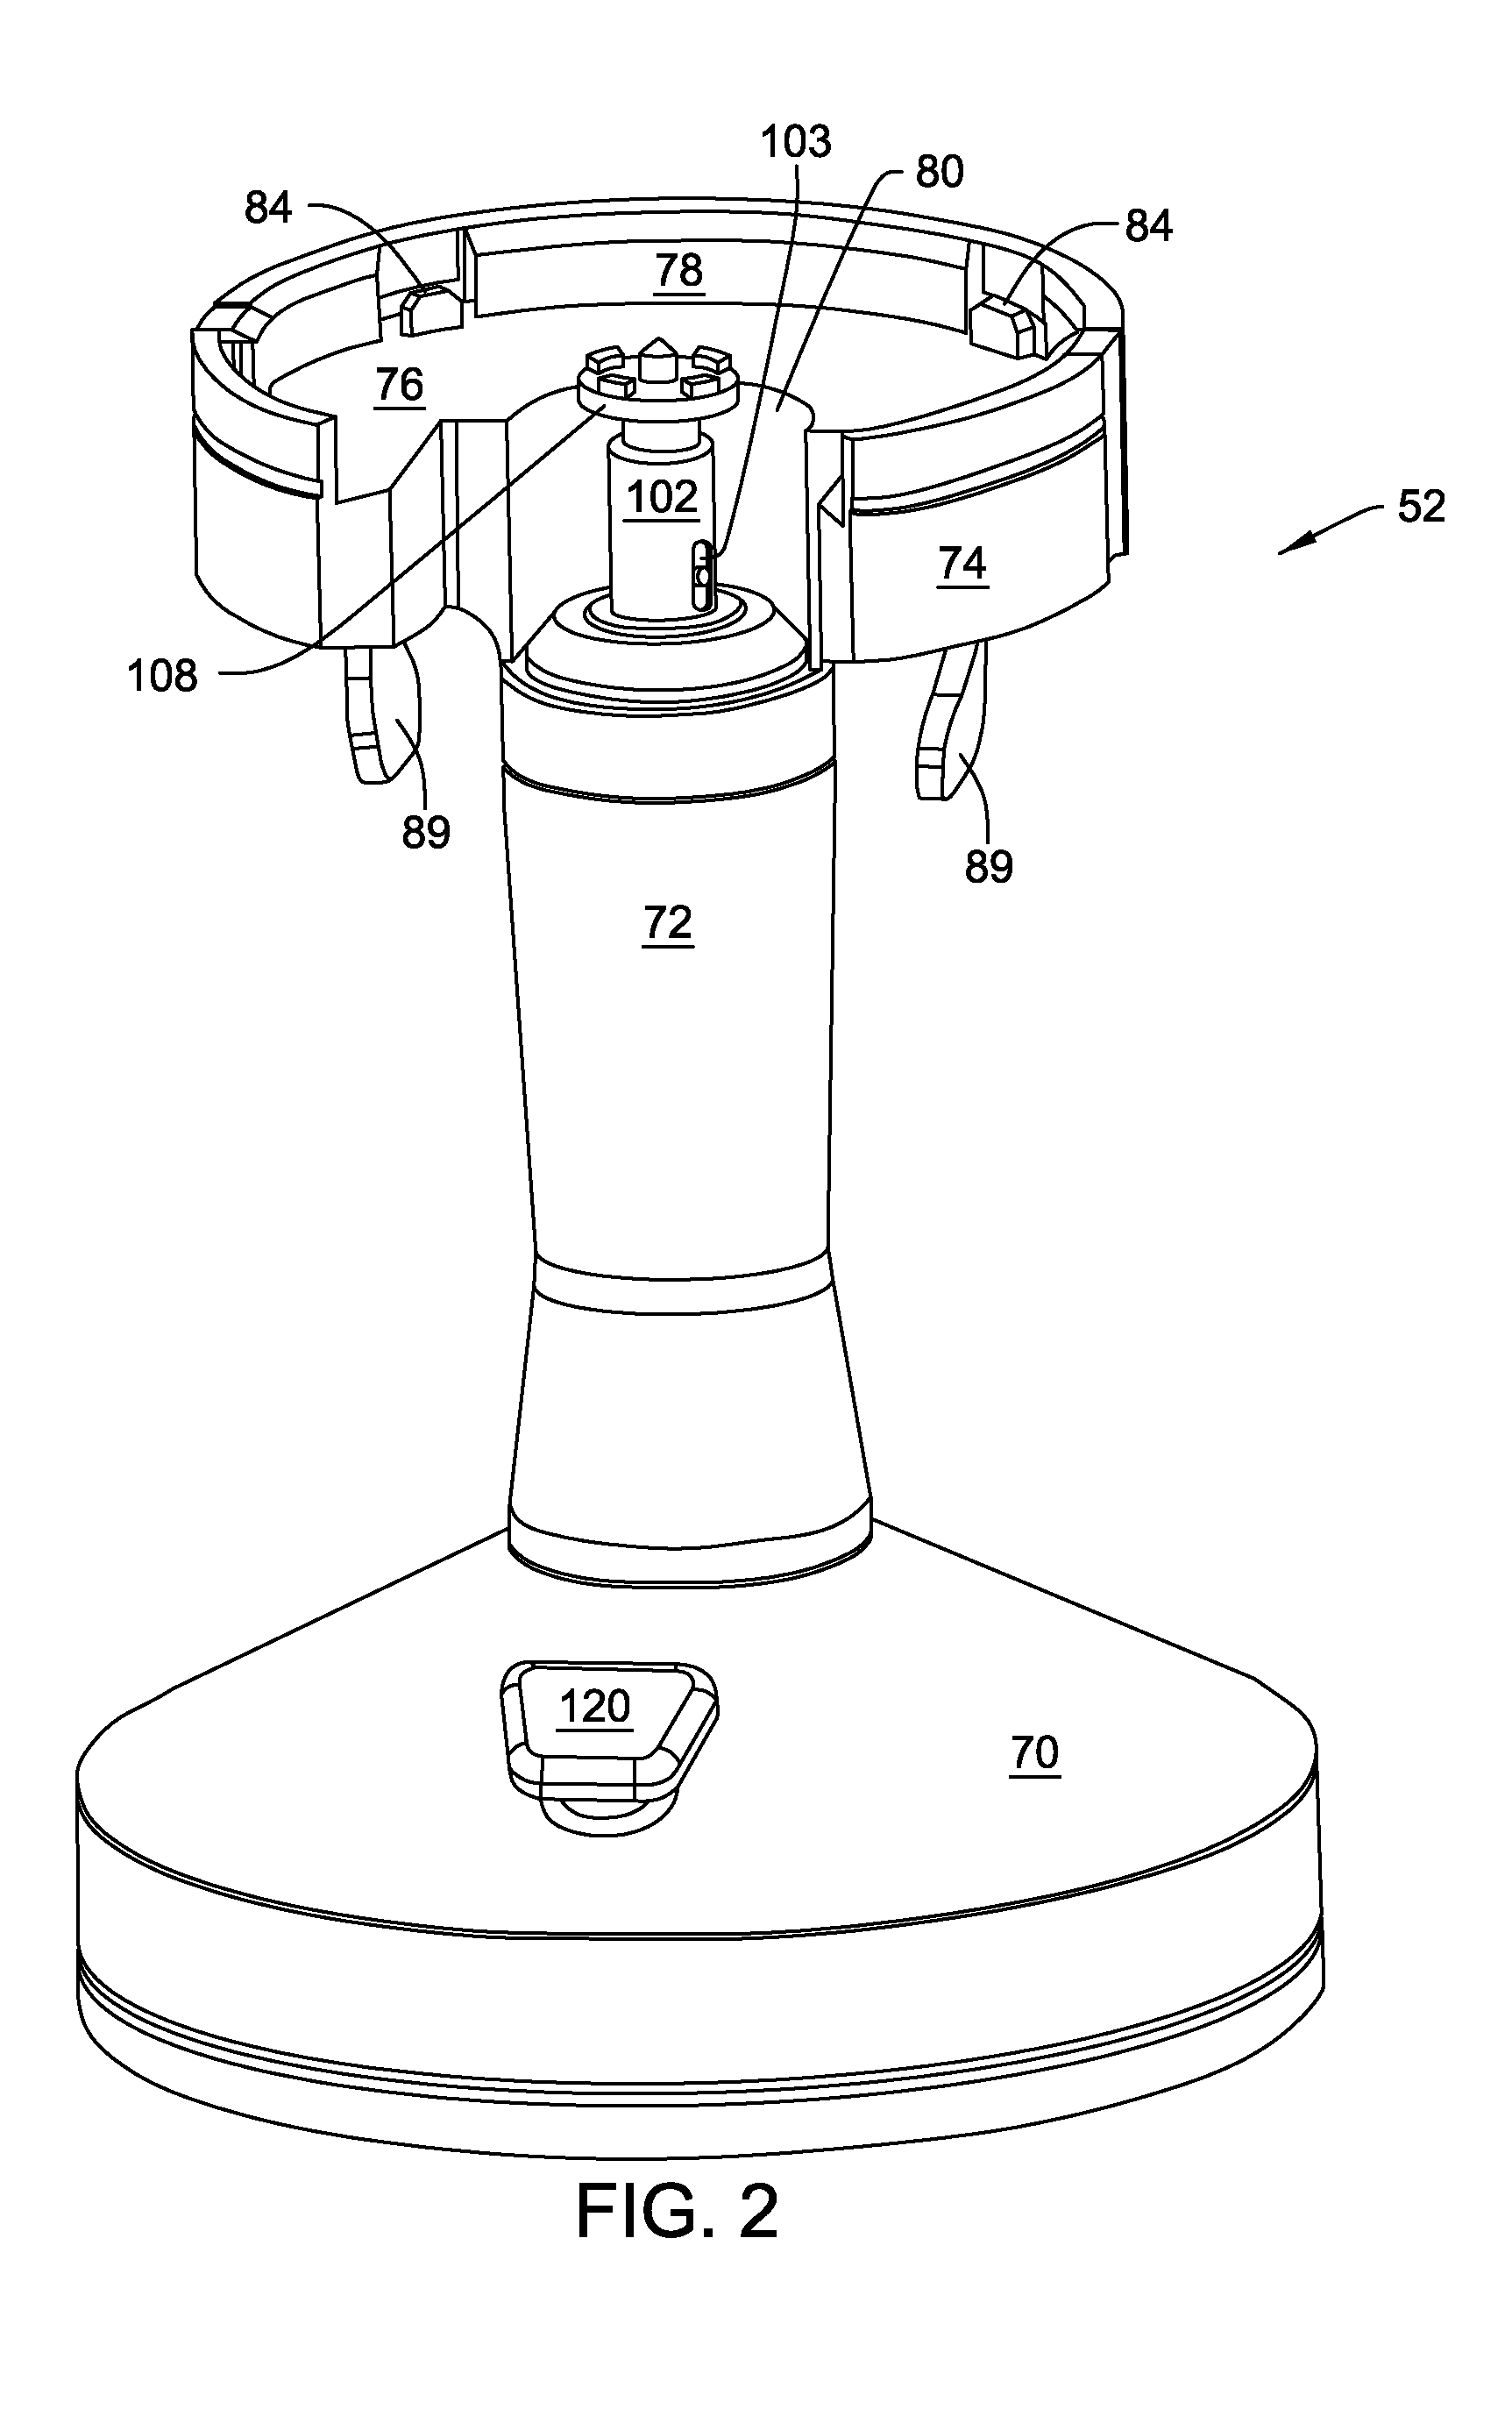 Integrated system for cleaning bone and milling the cleaned bone to form bone chips